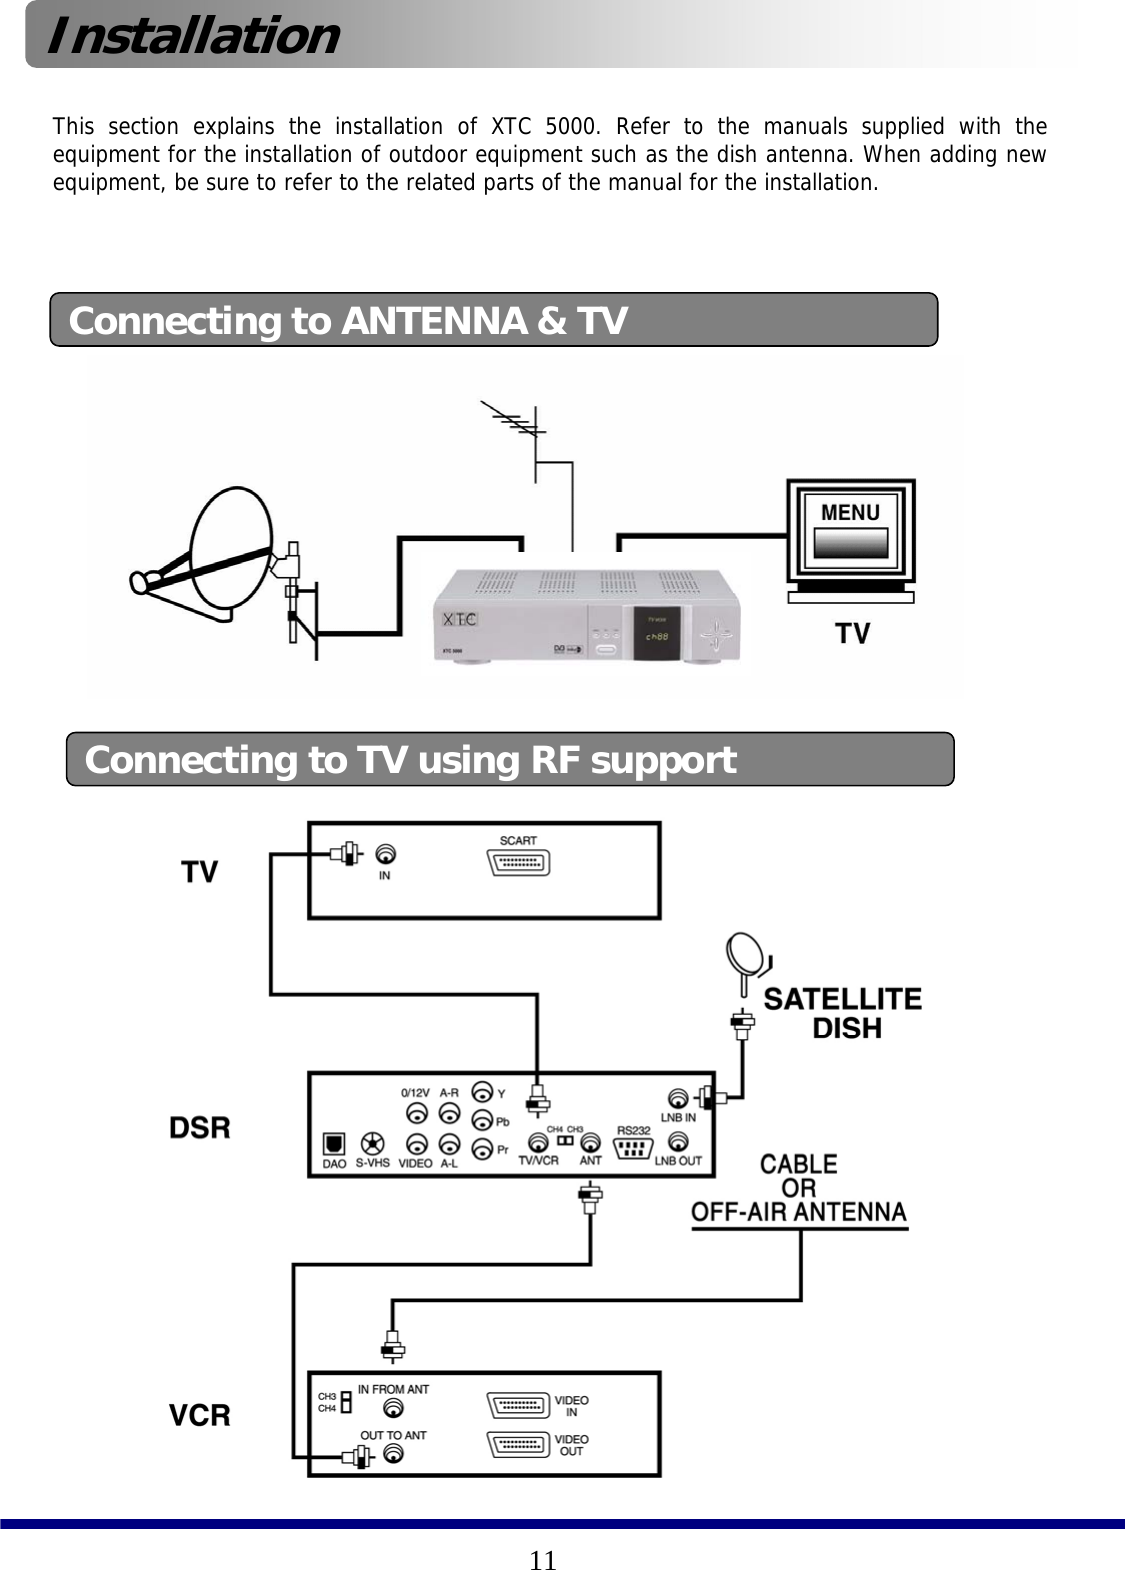 11This section explains the installation of XTC 5000. Refer to the manuals supplied with the equipment for the installation of outdoor equipment such as the dish antenna. When adding new equipment, be sure to refer to the related parts of the manual for the installation.Connecting to ANTENNA &amp; TVInstallationConnecting to TV using RF support  